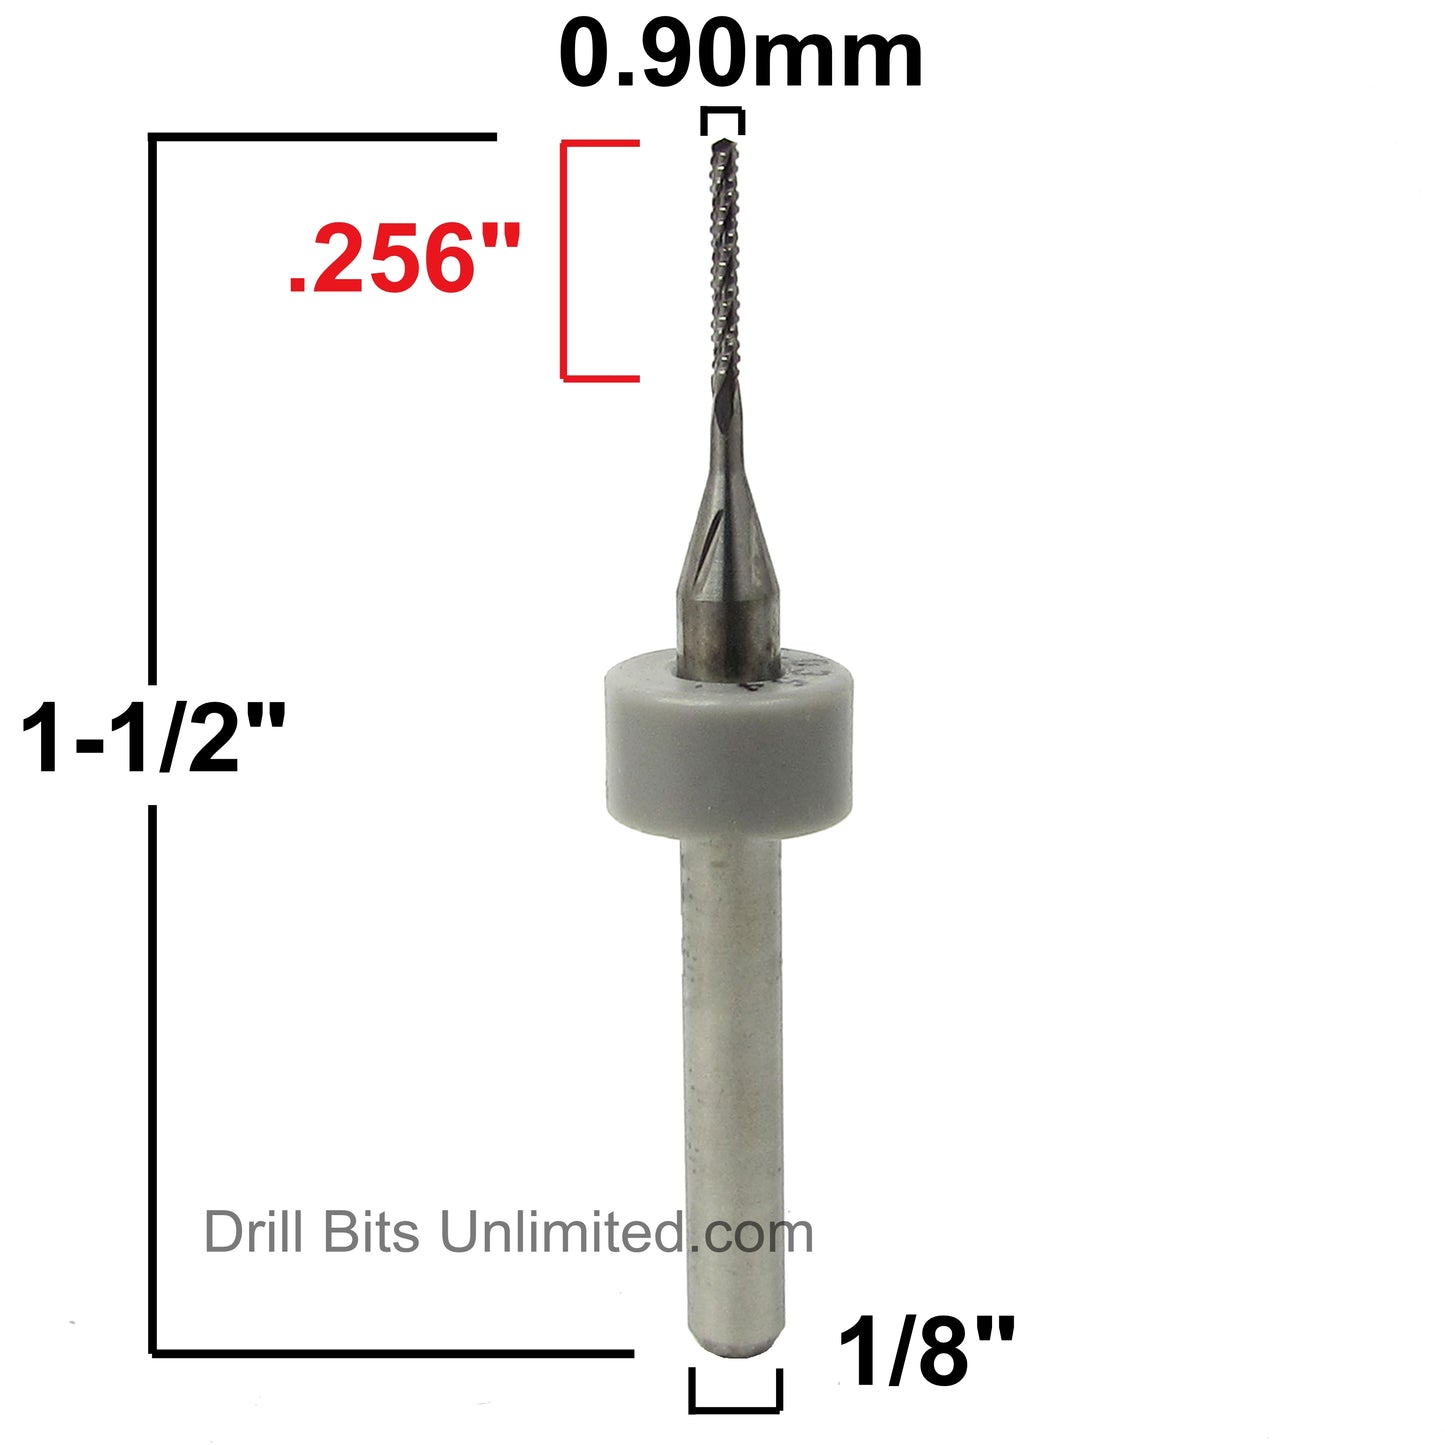 .035 0.9mm x .256" LOC Chip Breaker Carbide Router - Drill Point Tip R151